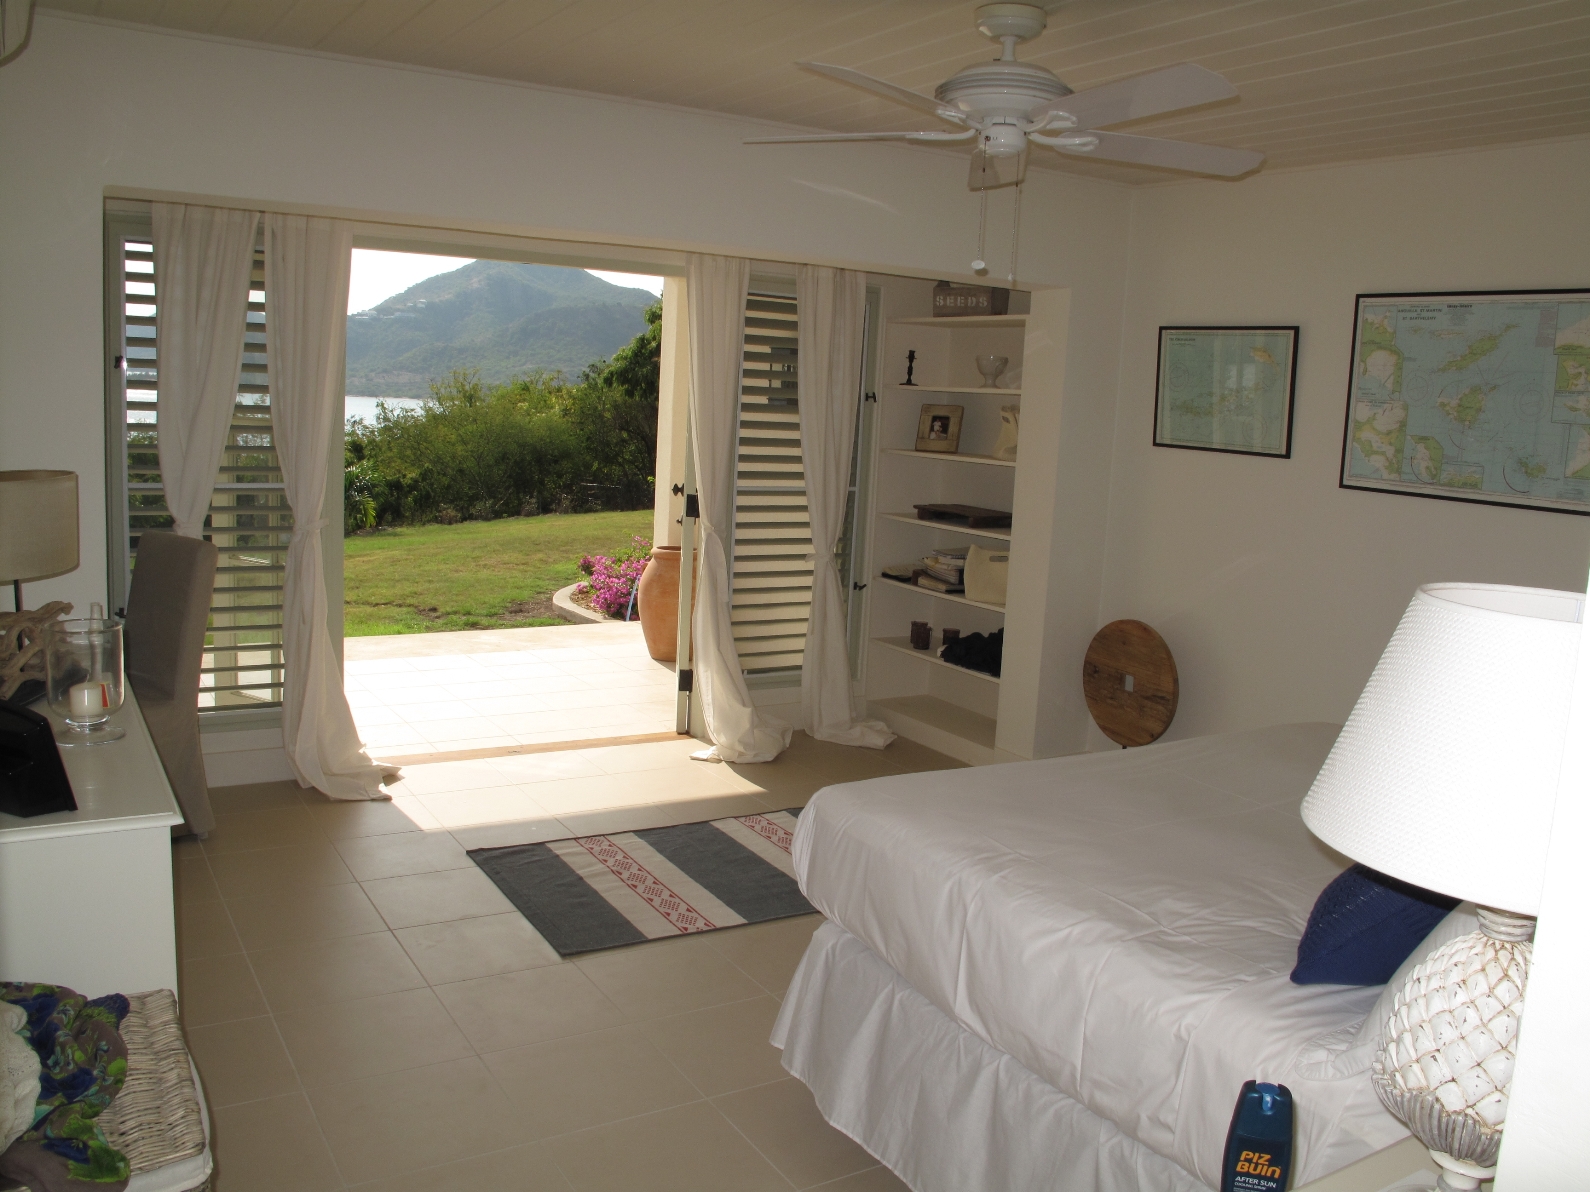 The double bedroom with a view in Pigeon Beach House, Antigua